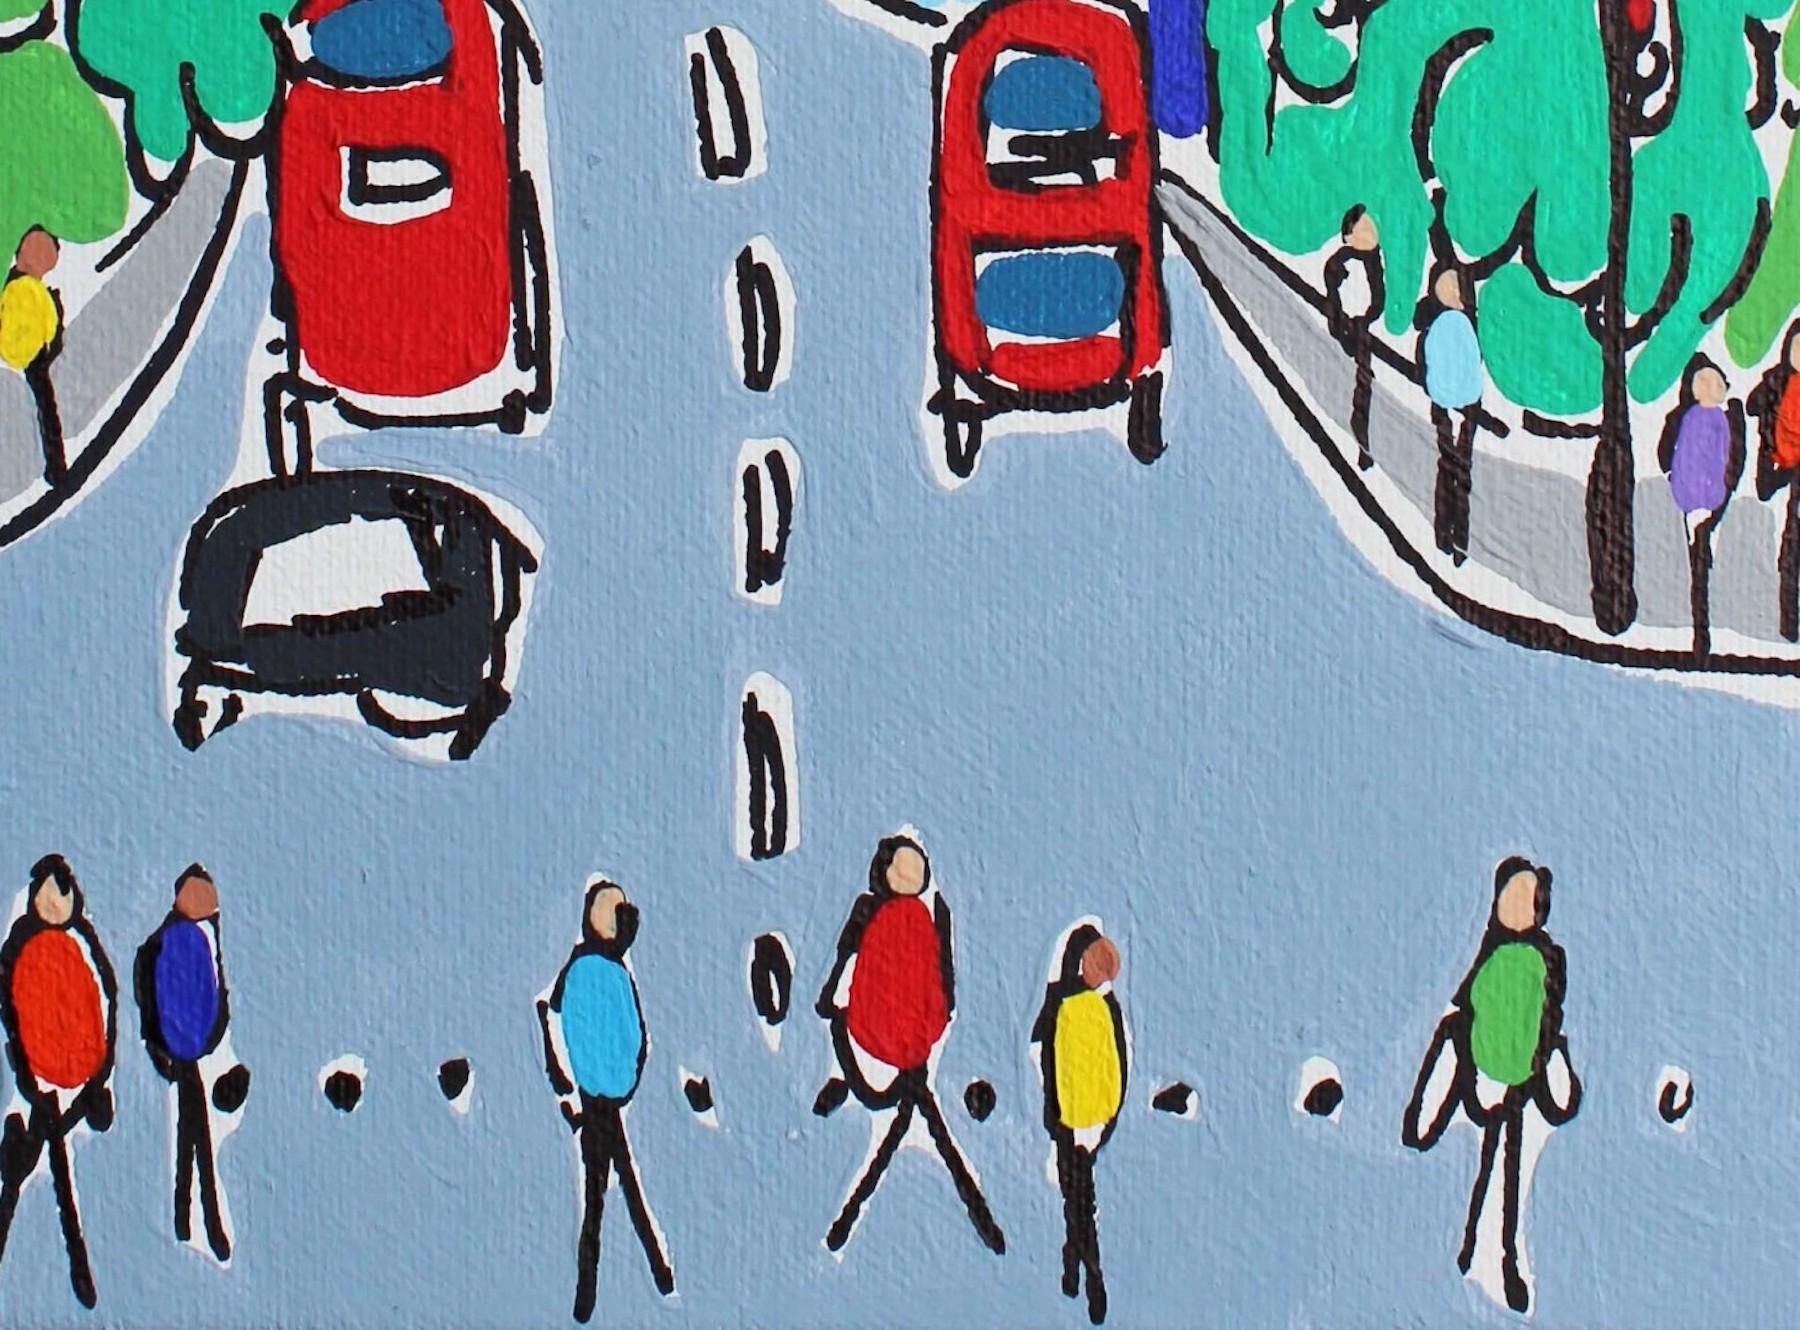 Mini colours of Oxford street [2020]

Shoppers crossing the colourful and busy Oxford street.

Additional information:
Original
Acrylic on canvas
Image size: H 30 cm x W 25 cm
Complete Size of Unframed Work: H 30 cm x W 25 cm x D 4cm
Sold